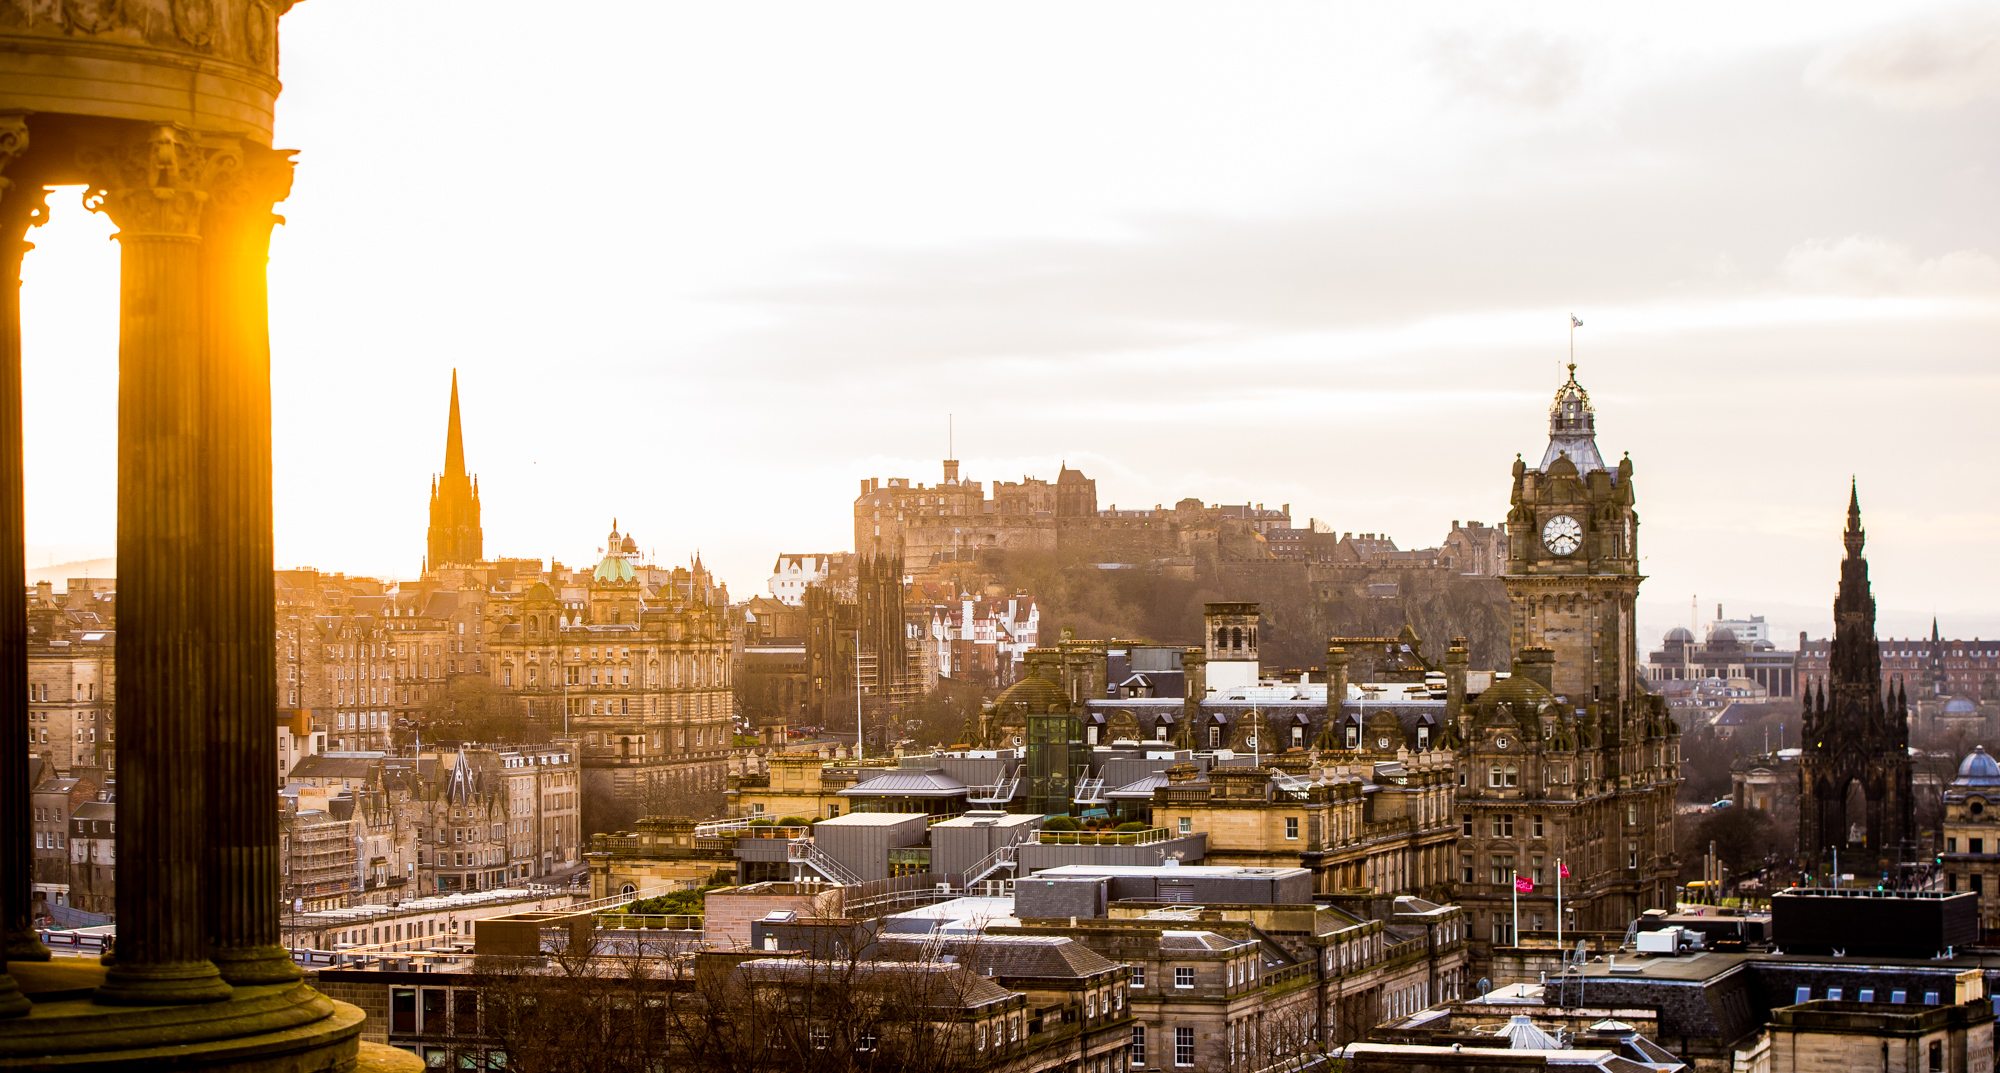 Edinburgh Quiz - How Much Do You Know About the City?